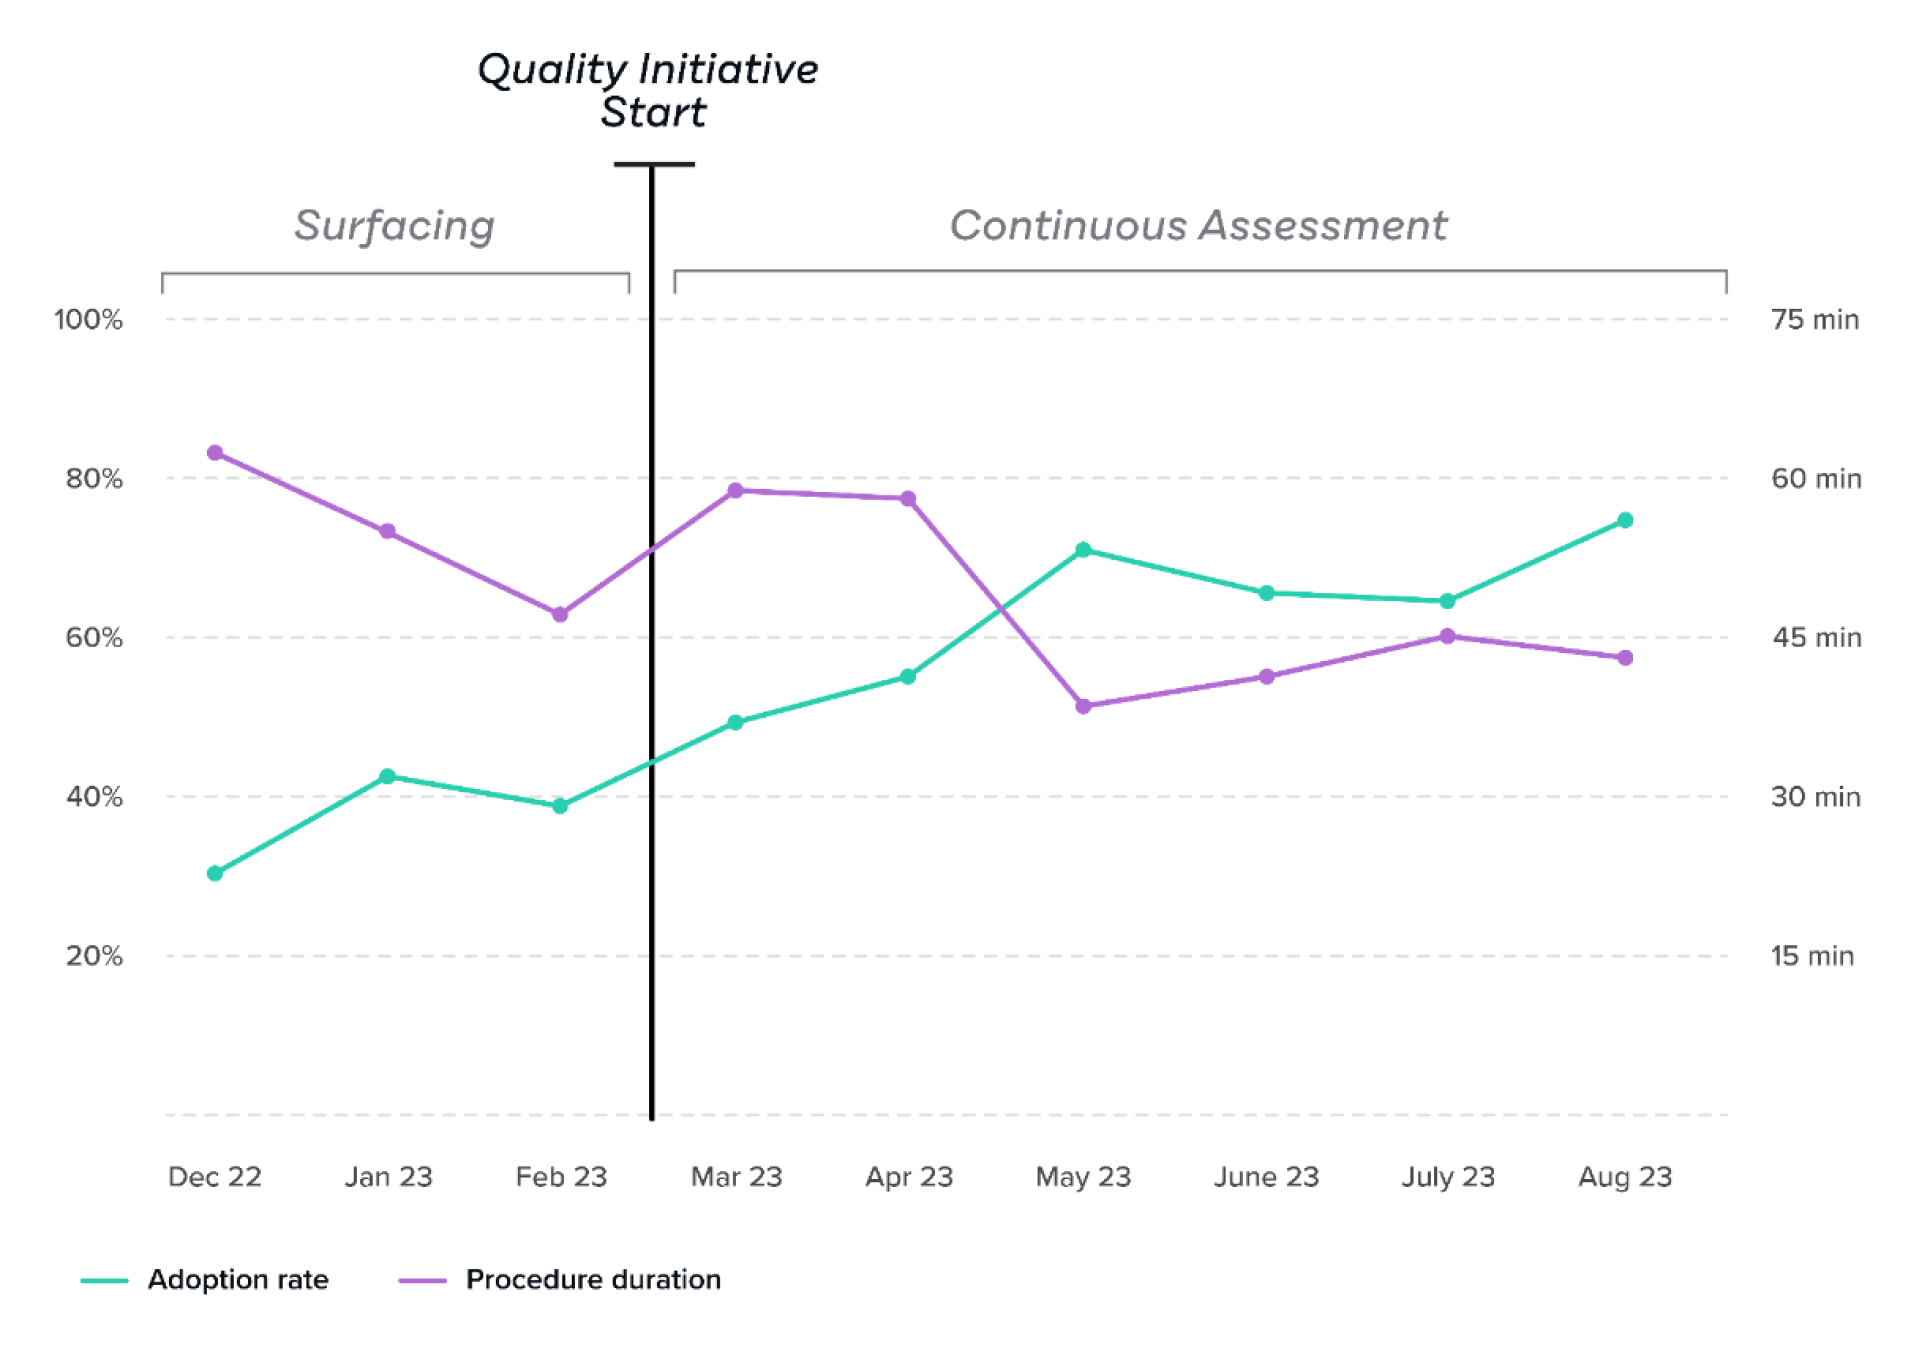 Line graph showing adoption rate and procedure duration after quality initiative start.